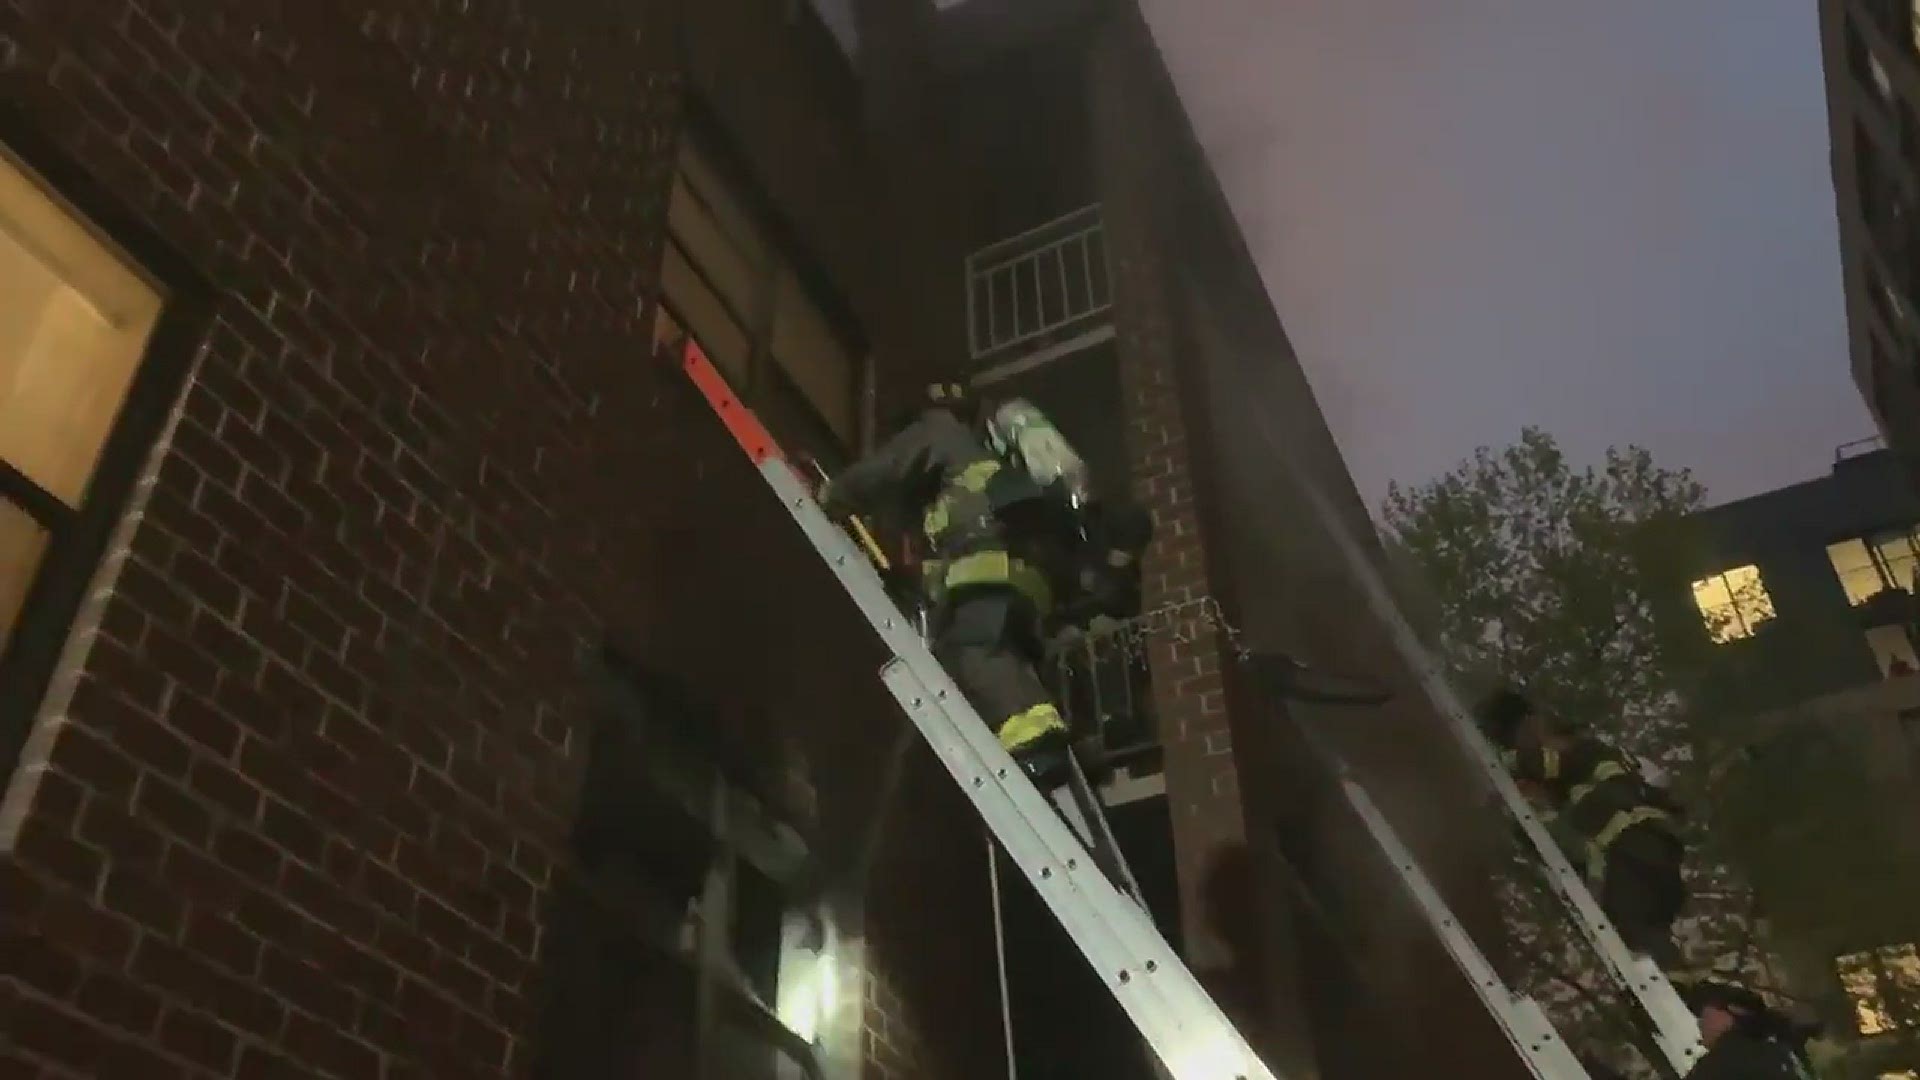 Video shows DC Fire and EMS firefighters attempting to save three people trapped by an apartment building blaze.